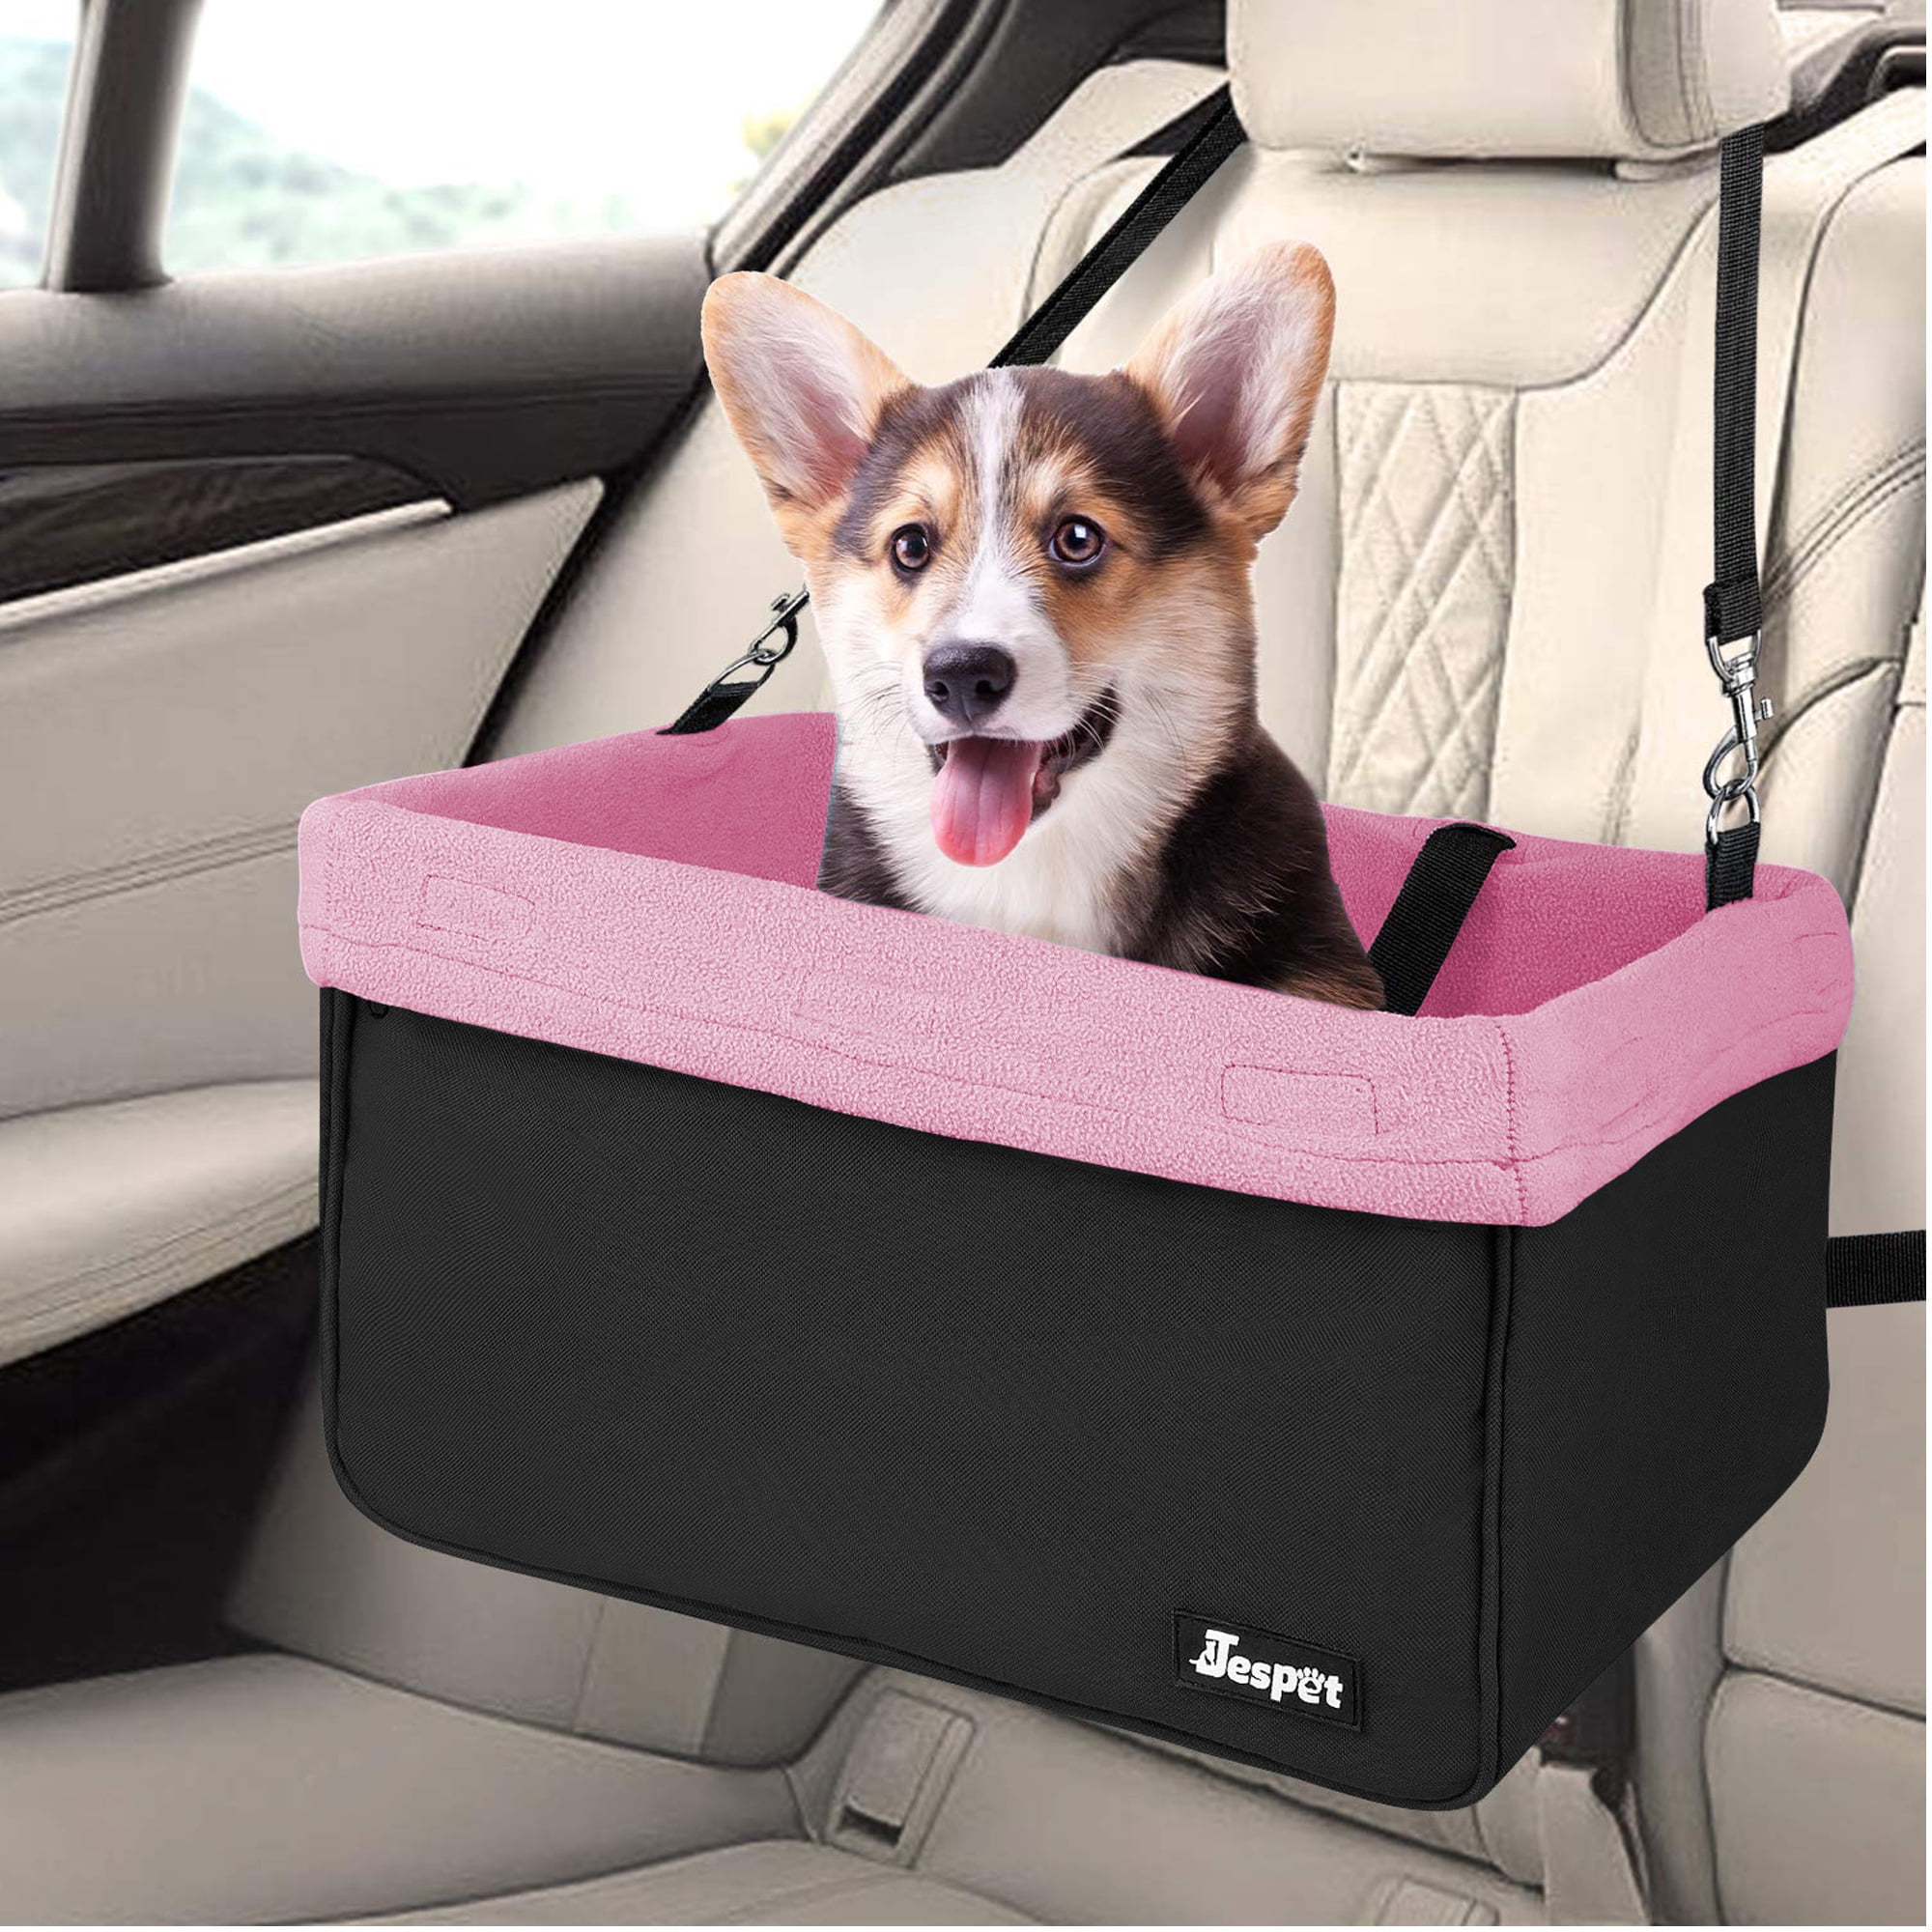 JESPET Dog Booster Seats for Cars Portable Dog Car Seat Travel Carrier with Seat Belt for 24lbs Pets